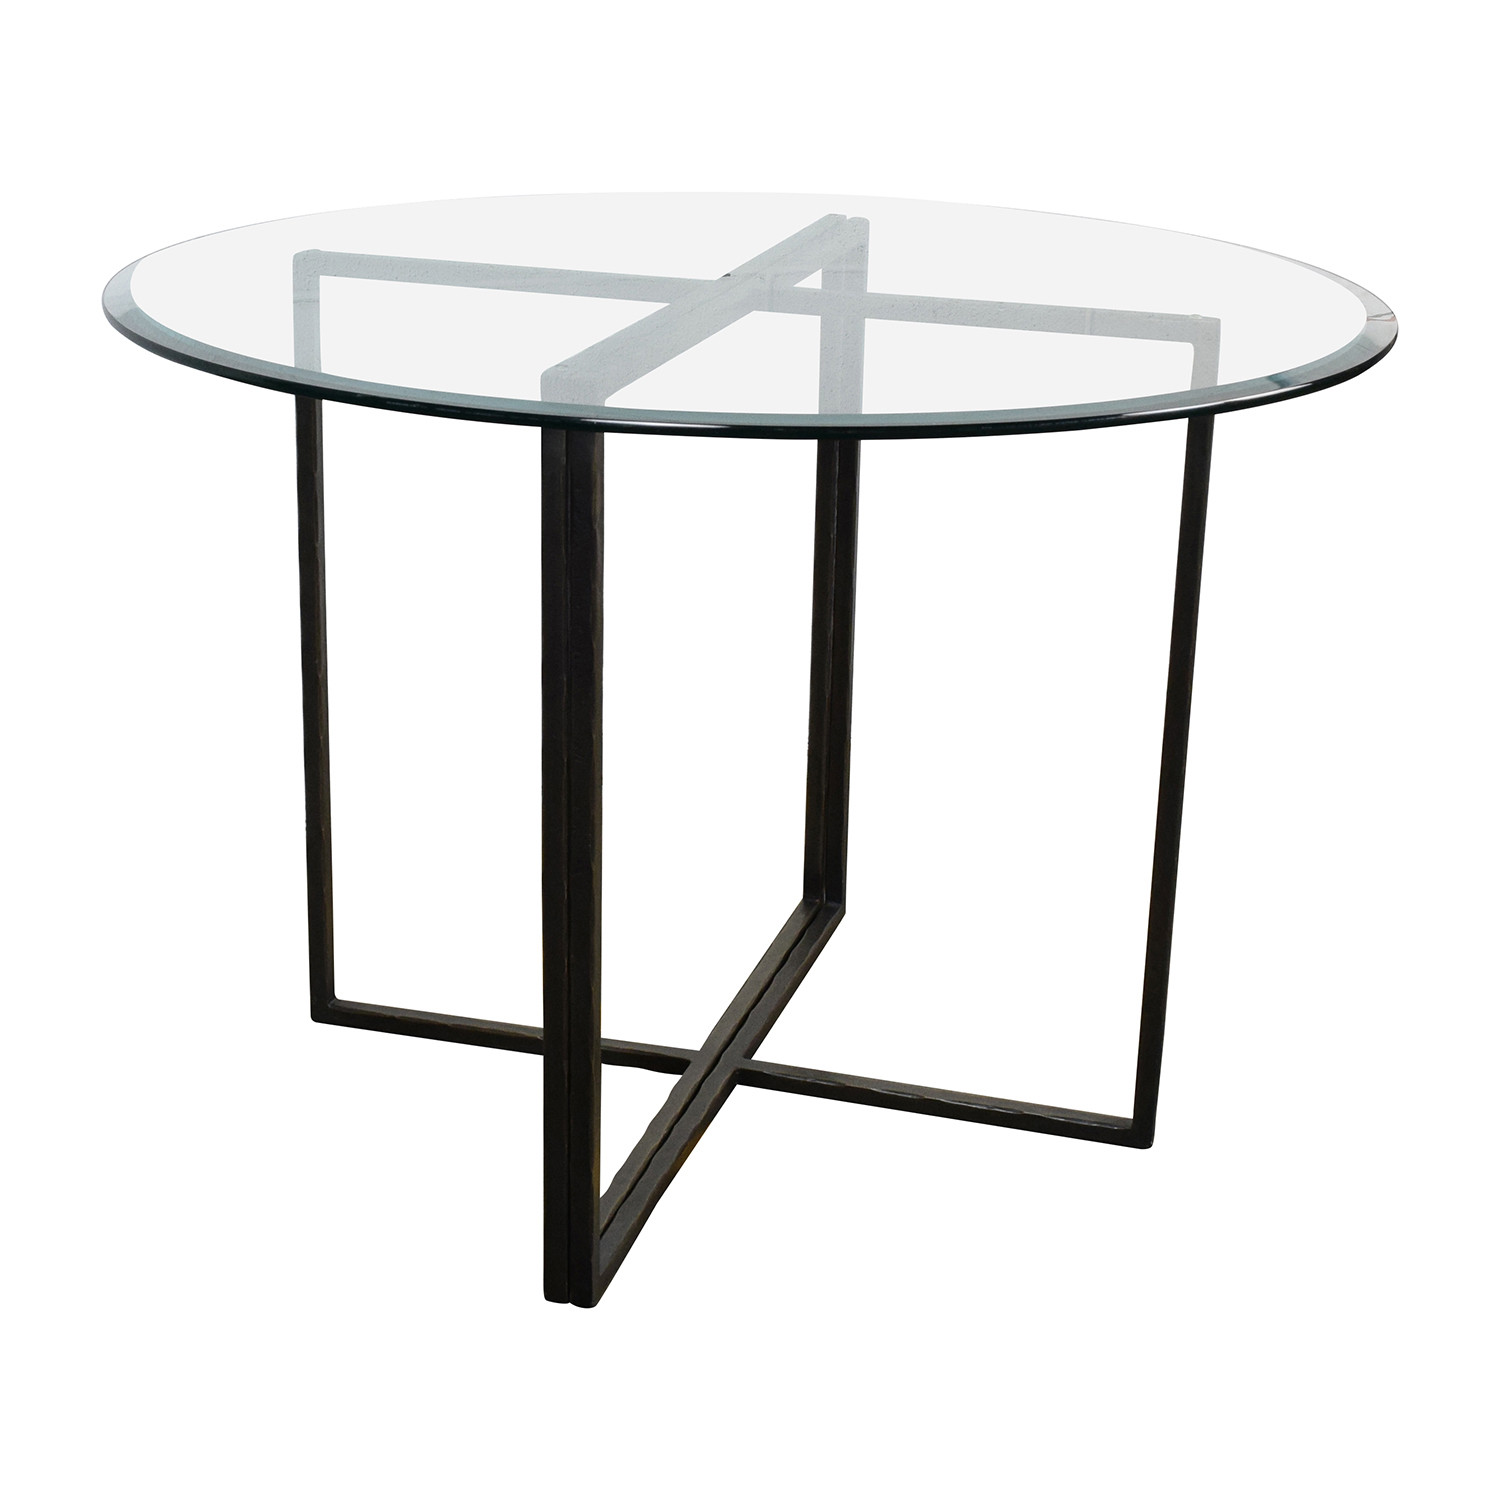 Best ideas about Crate And Barrel Dining Table
. Save or Pin OFF Crate and Barrel Crate & Barrel Everitt Glass Now.